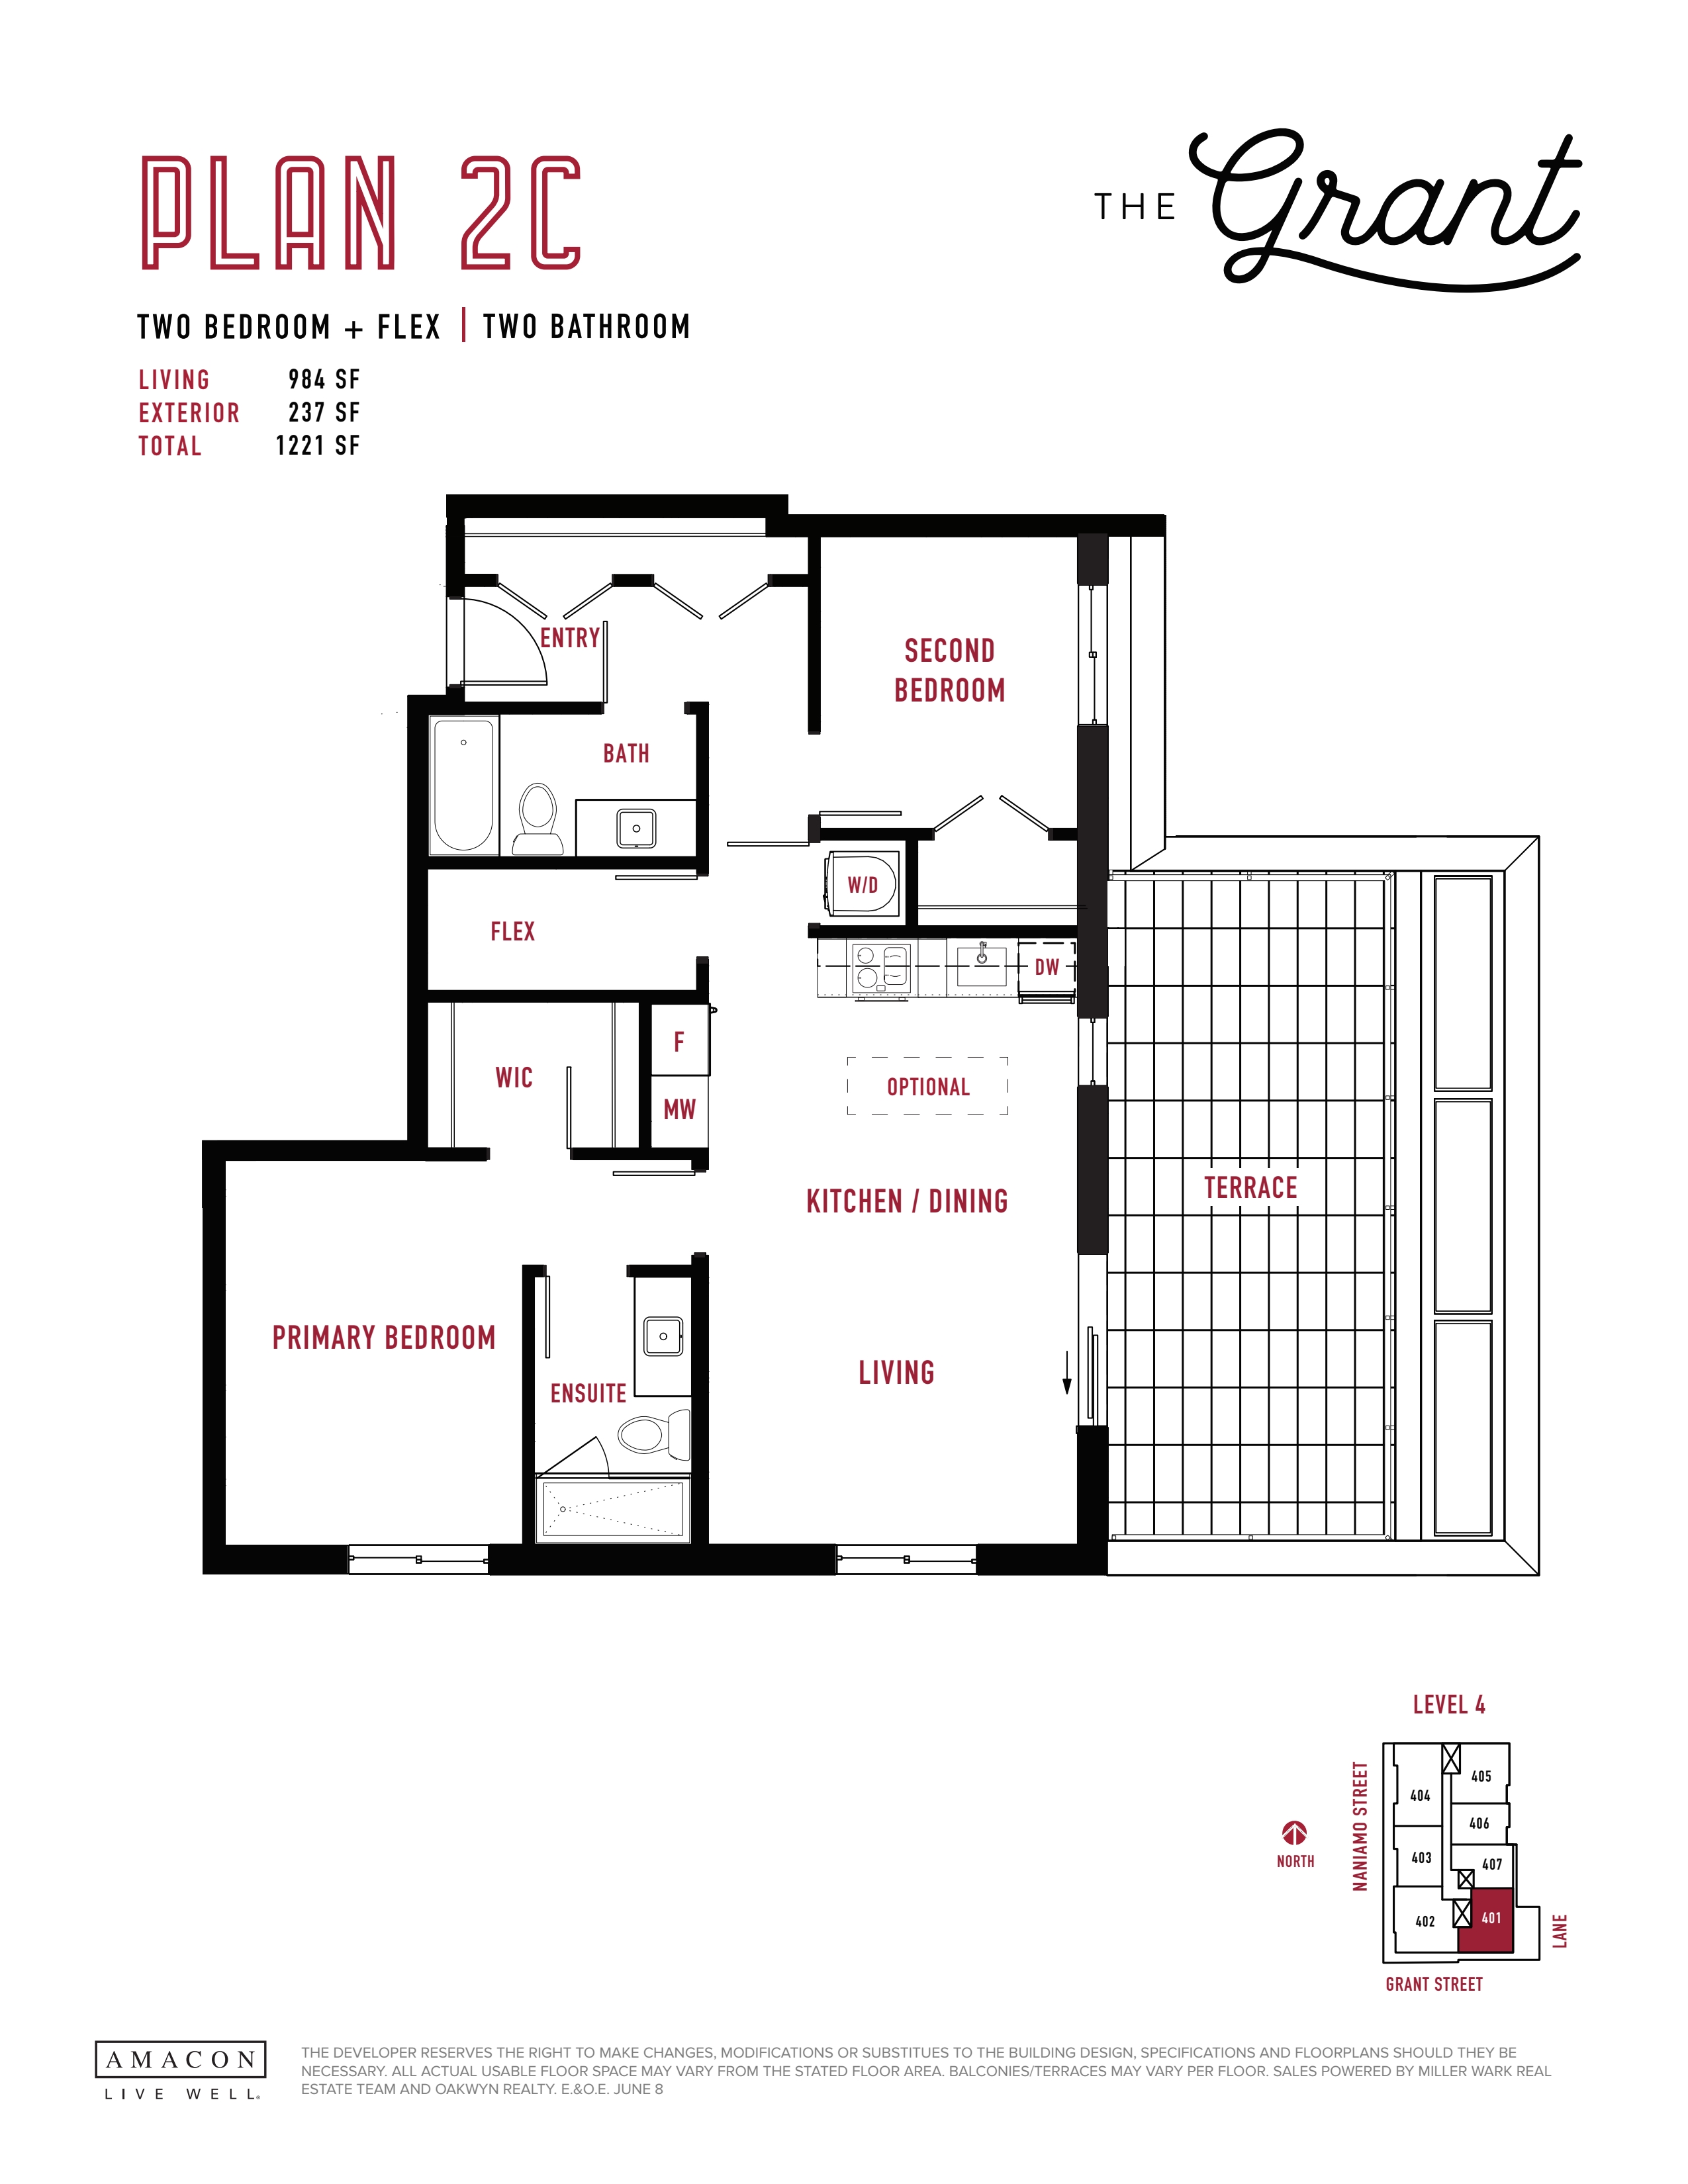 2C Floor Plan of The Grant Condos with undefined beds